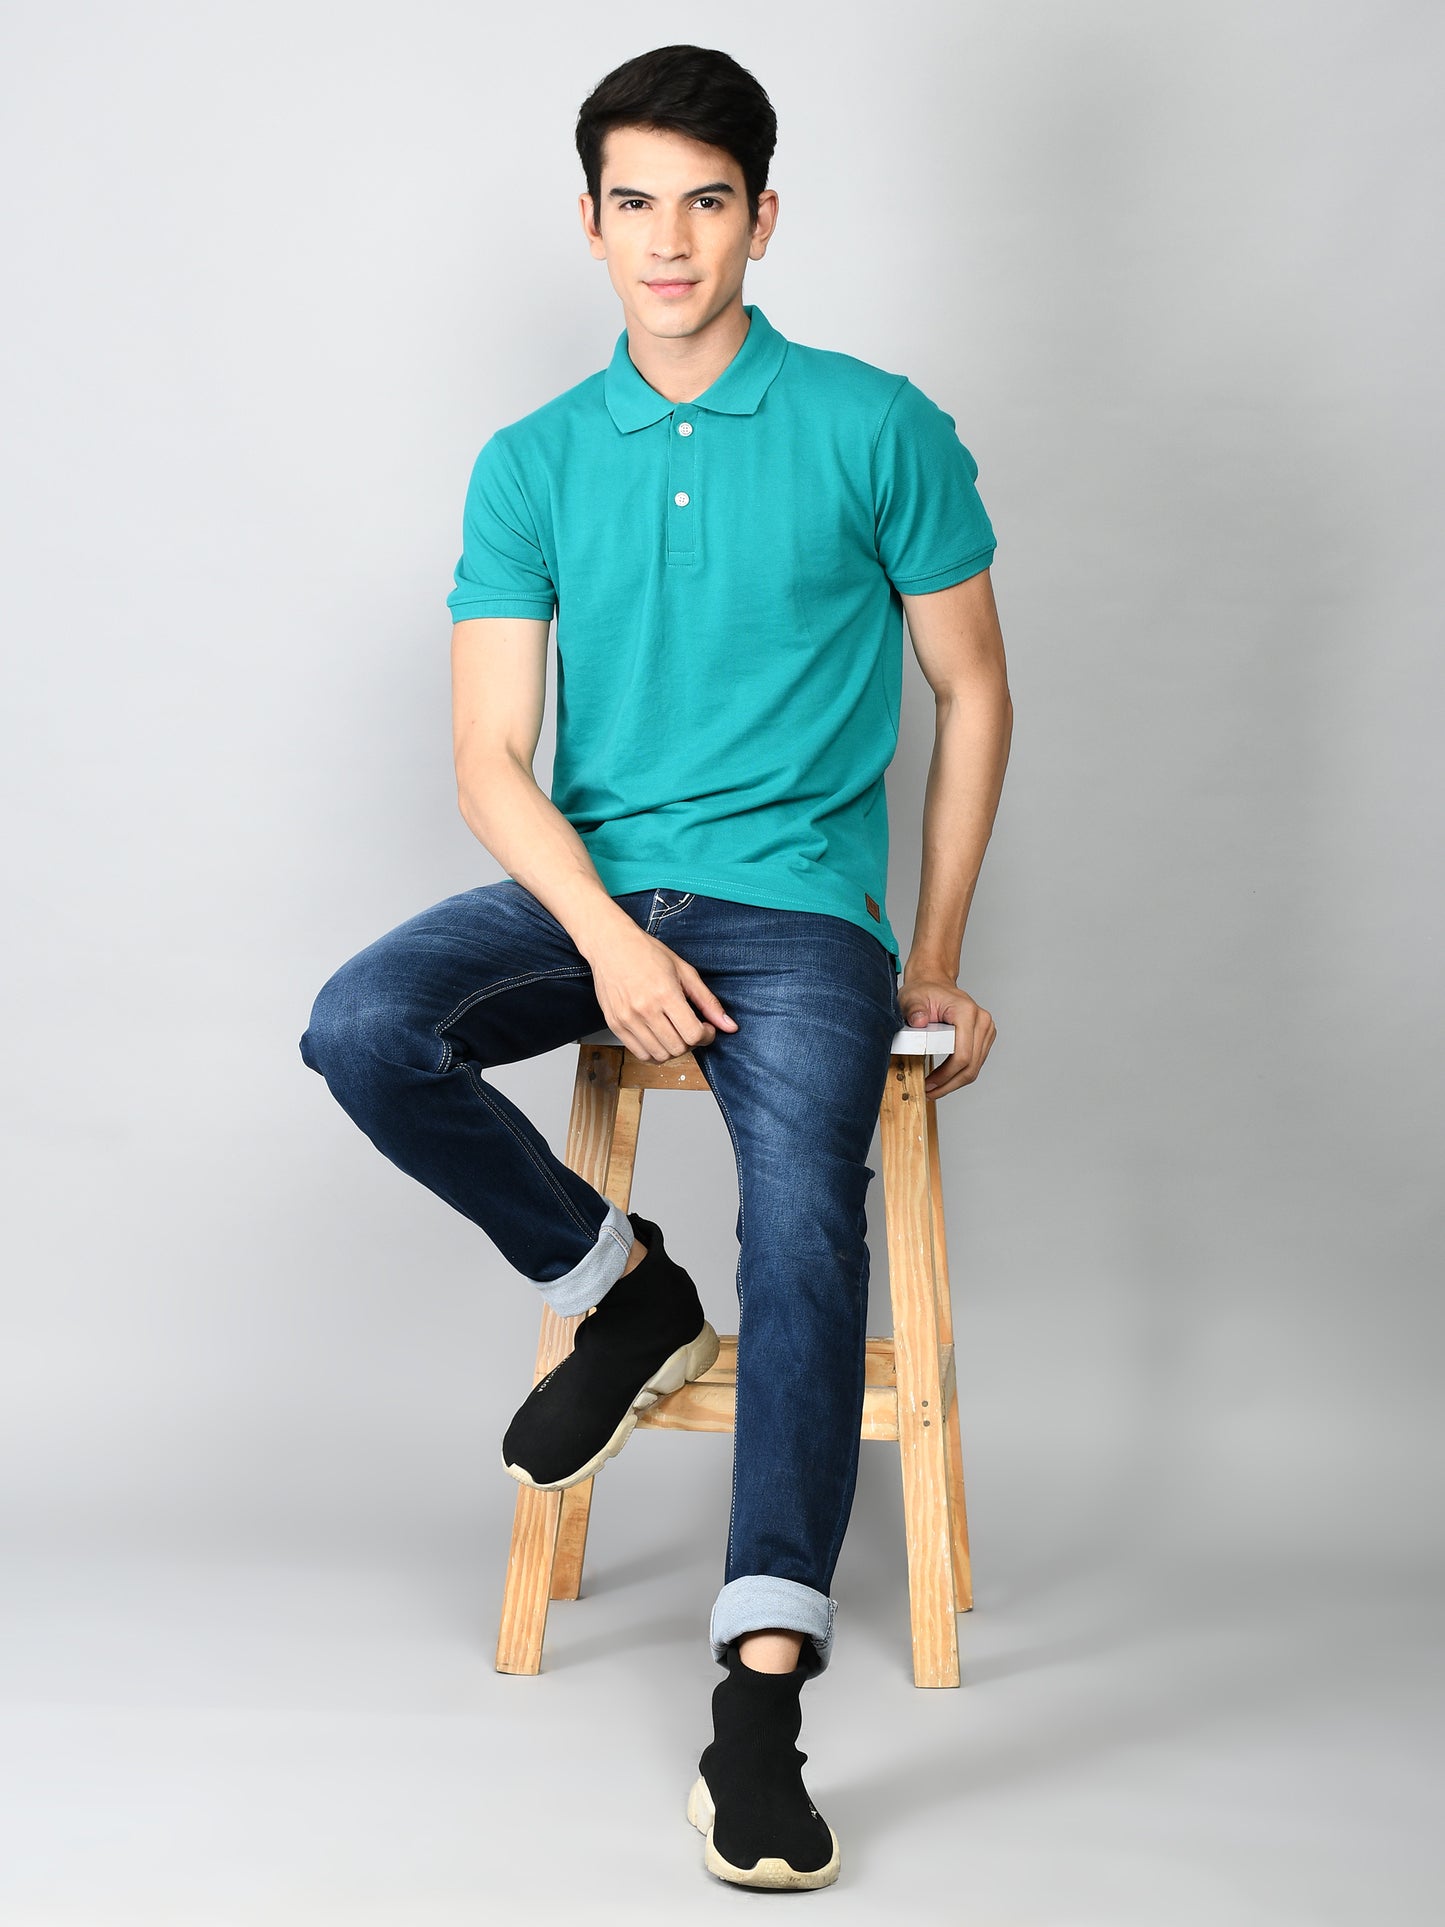 Golfer Polo T-Shirt for Men : Persion Green